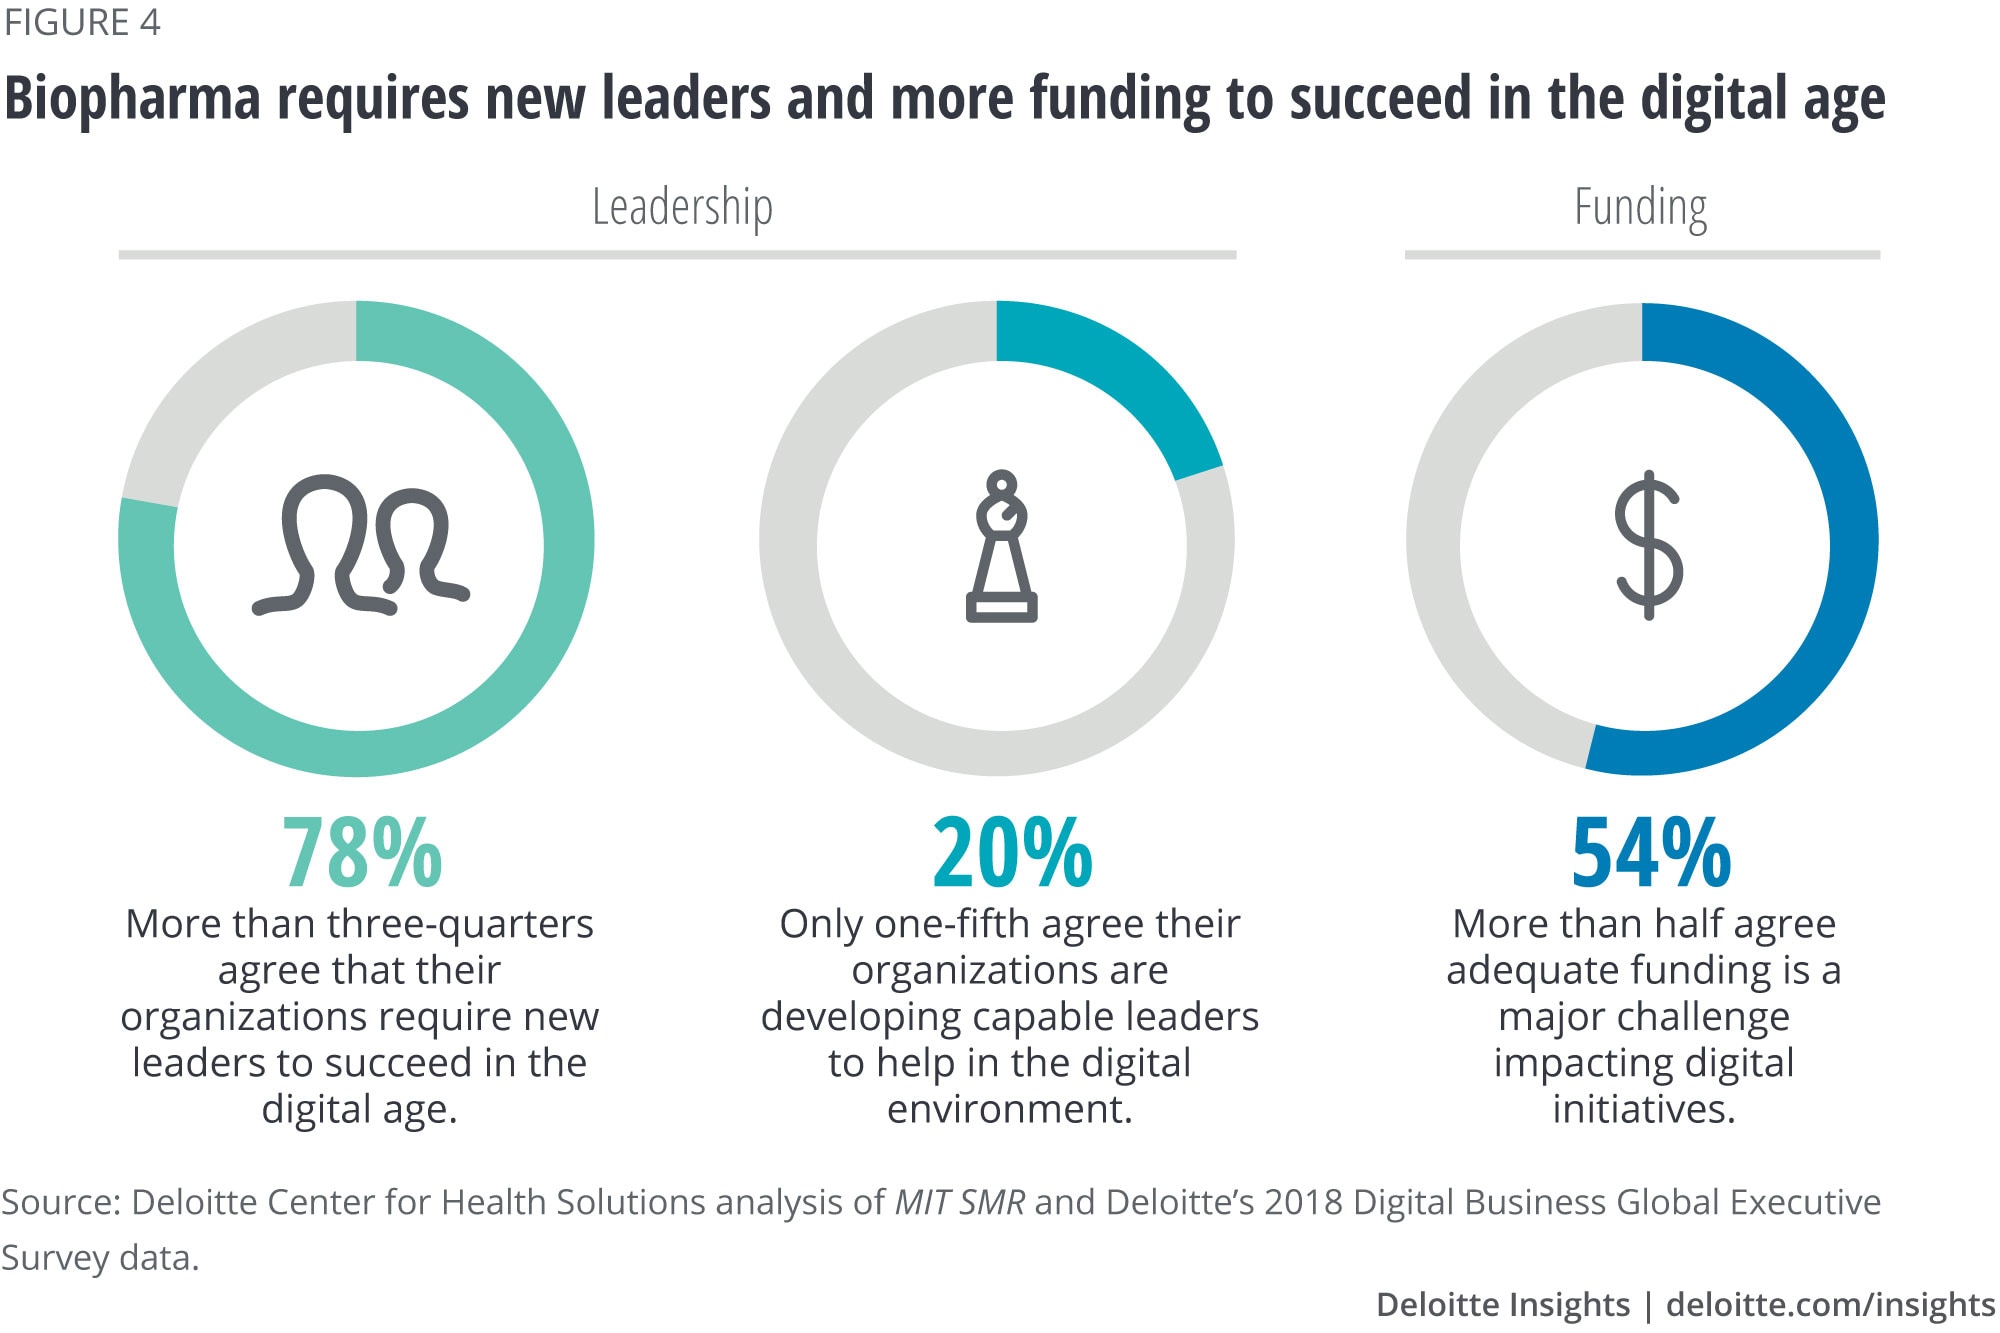 Biopharma requires new leaders and more funding to succeed in the digital age